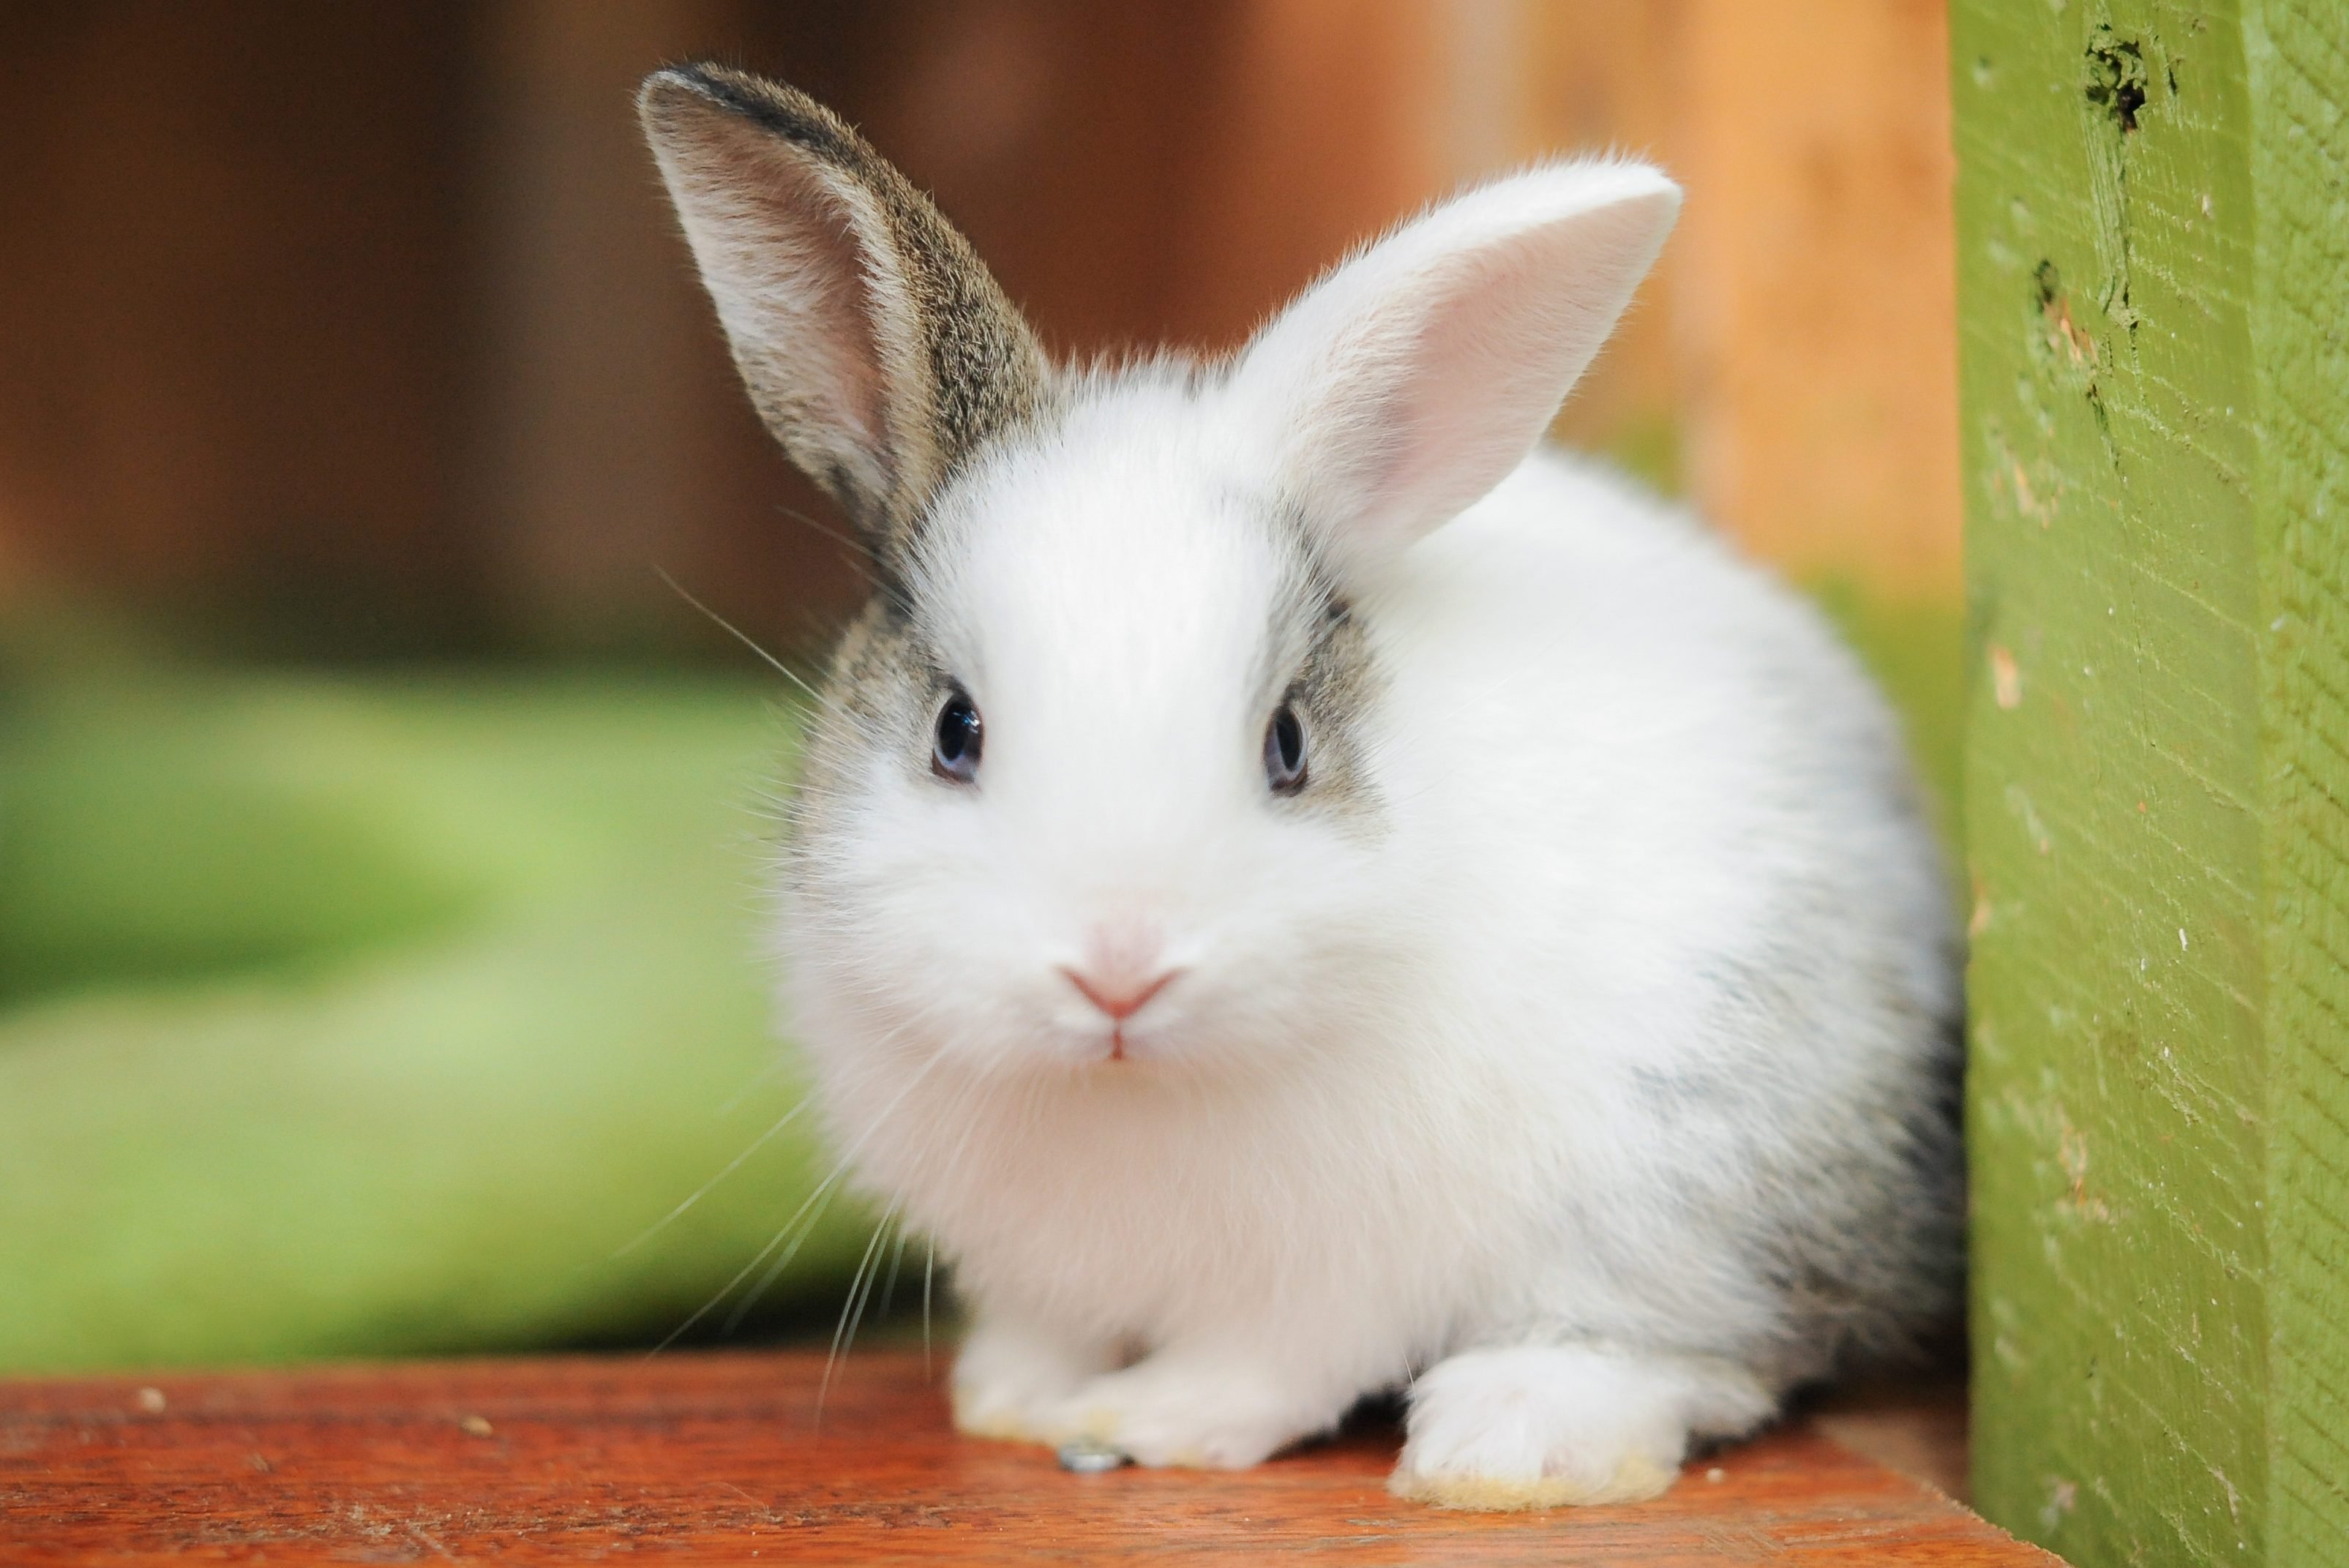 Cutest Bunnies You'll Want to Take Home | Reader's Digest